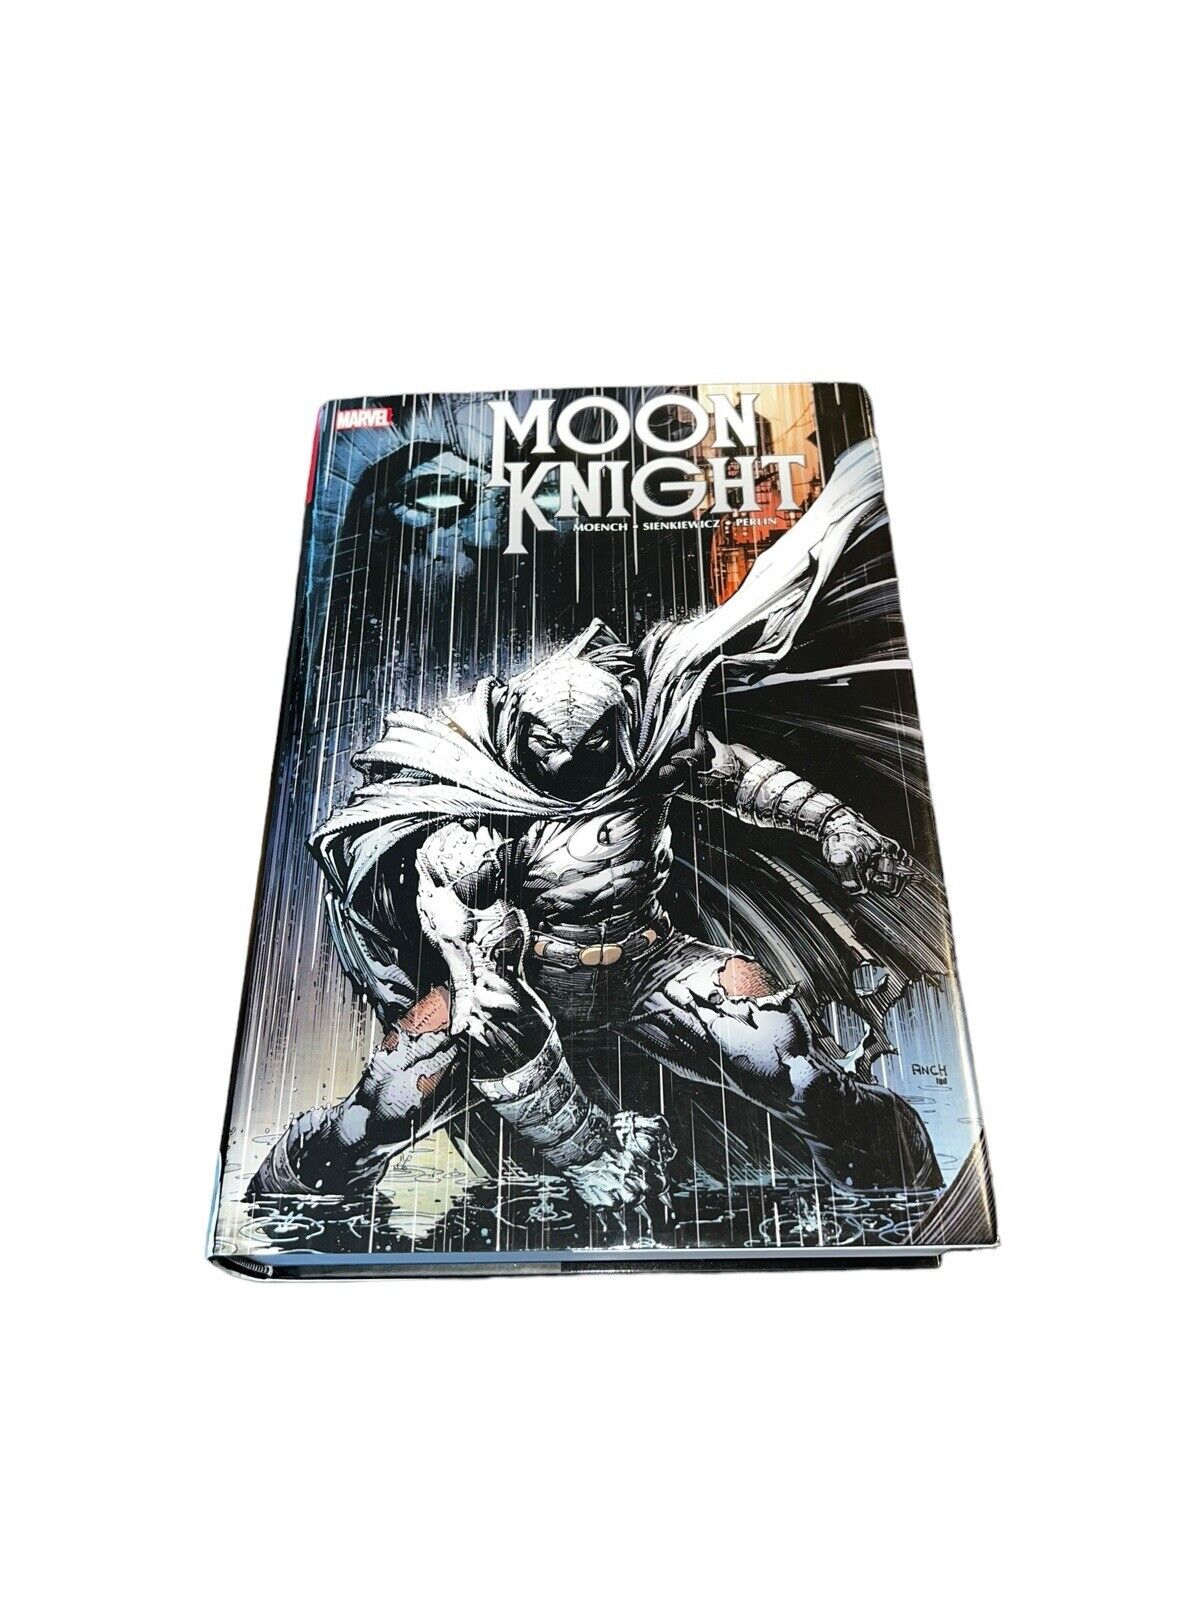 Moon Knight Omnibus #1 (Marvel, 2020) Hardback Book With Dust Jacket Excellent